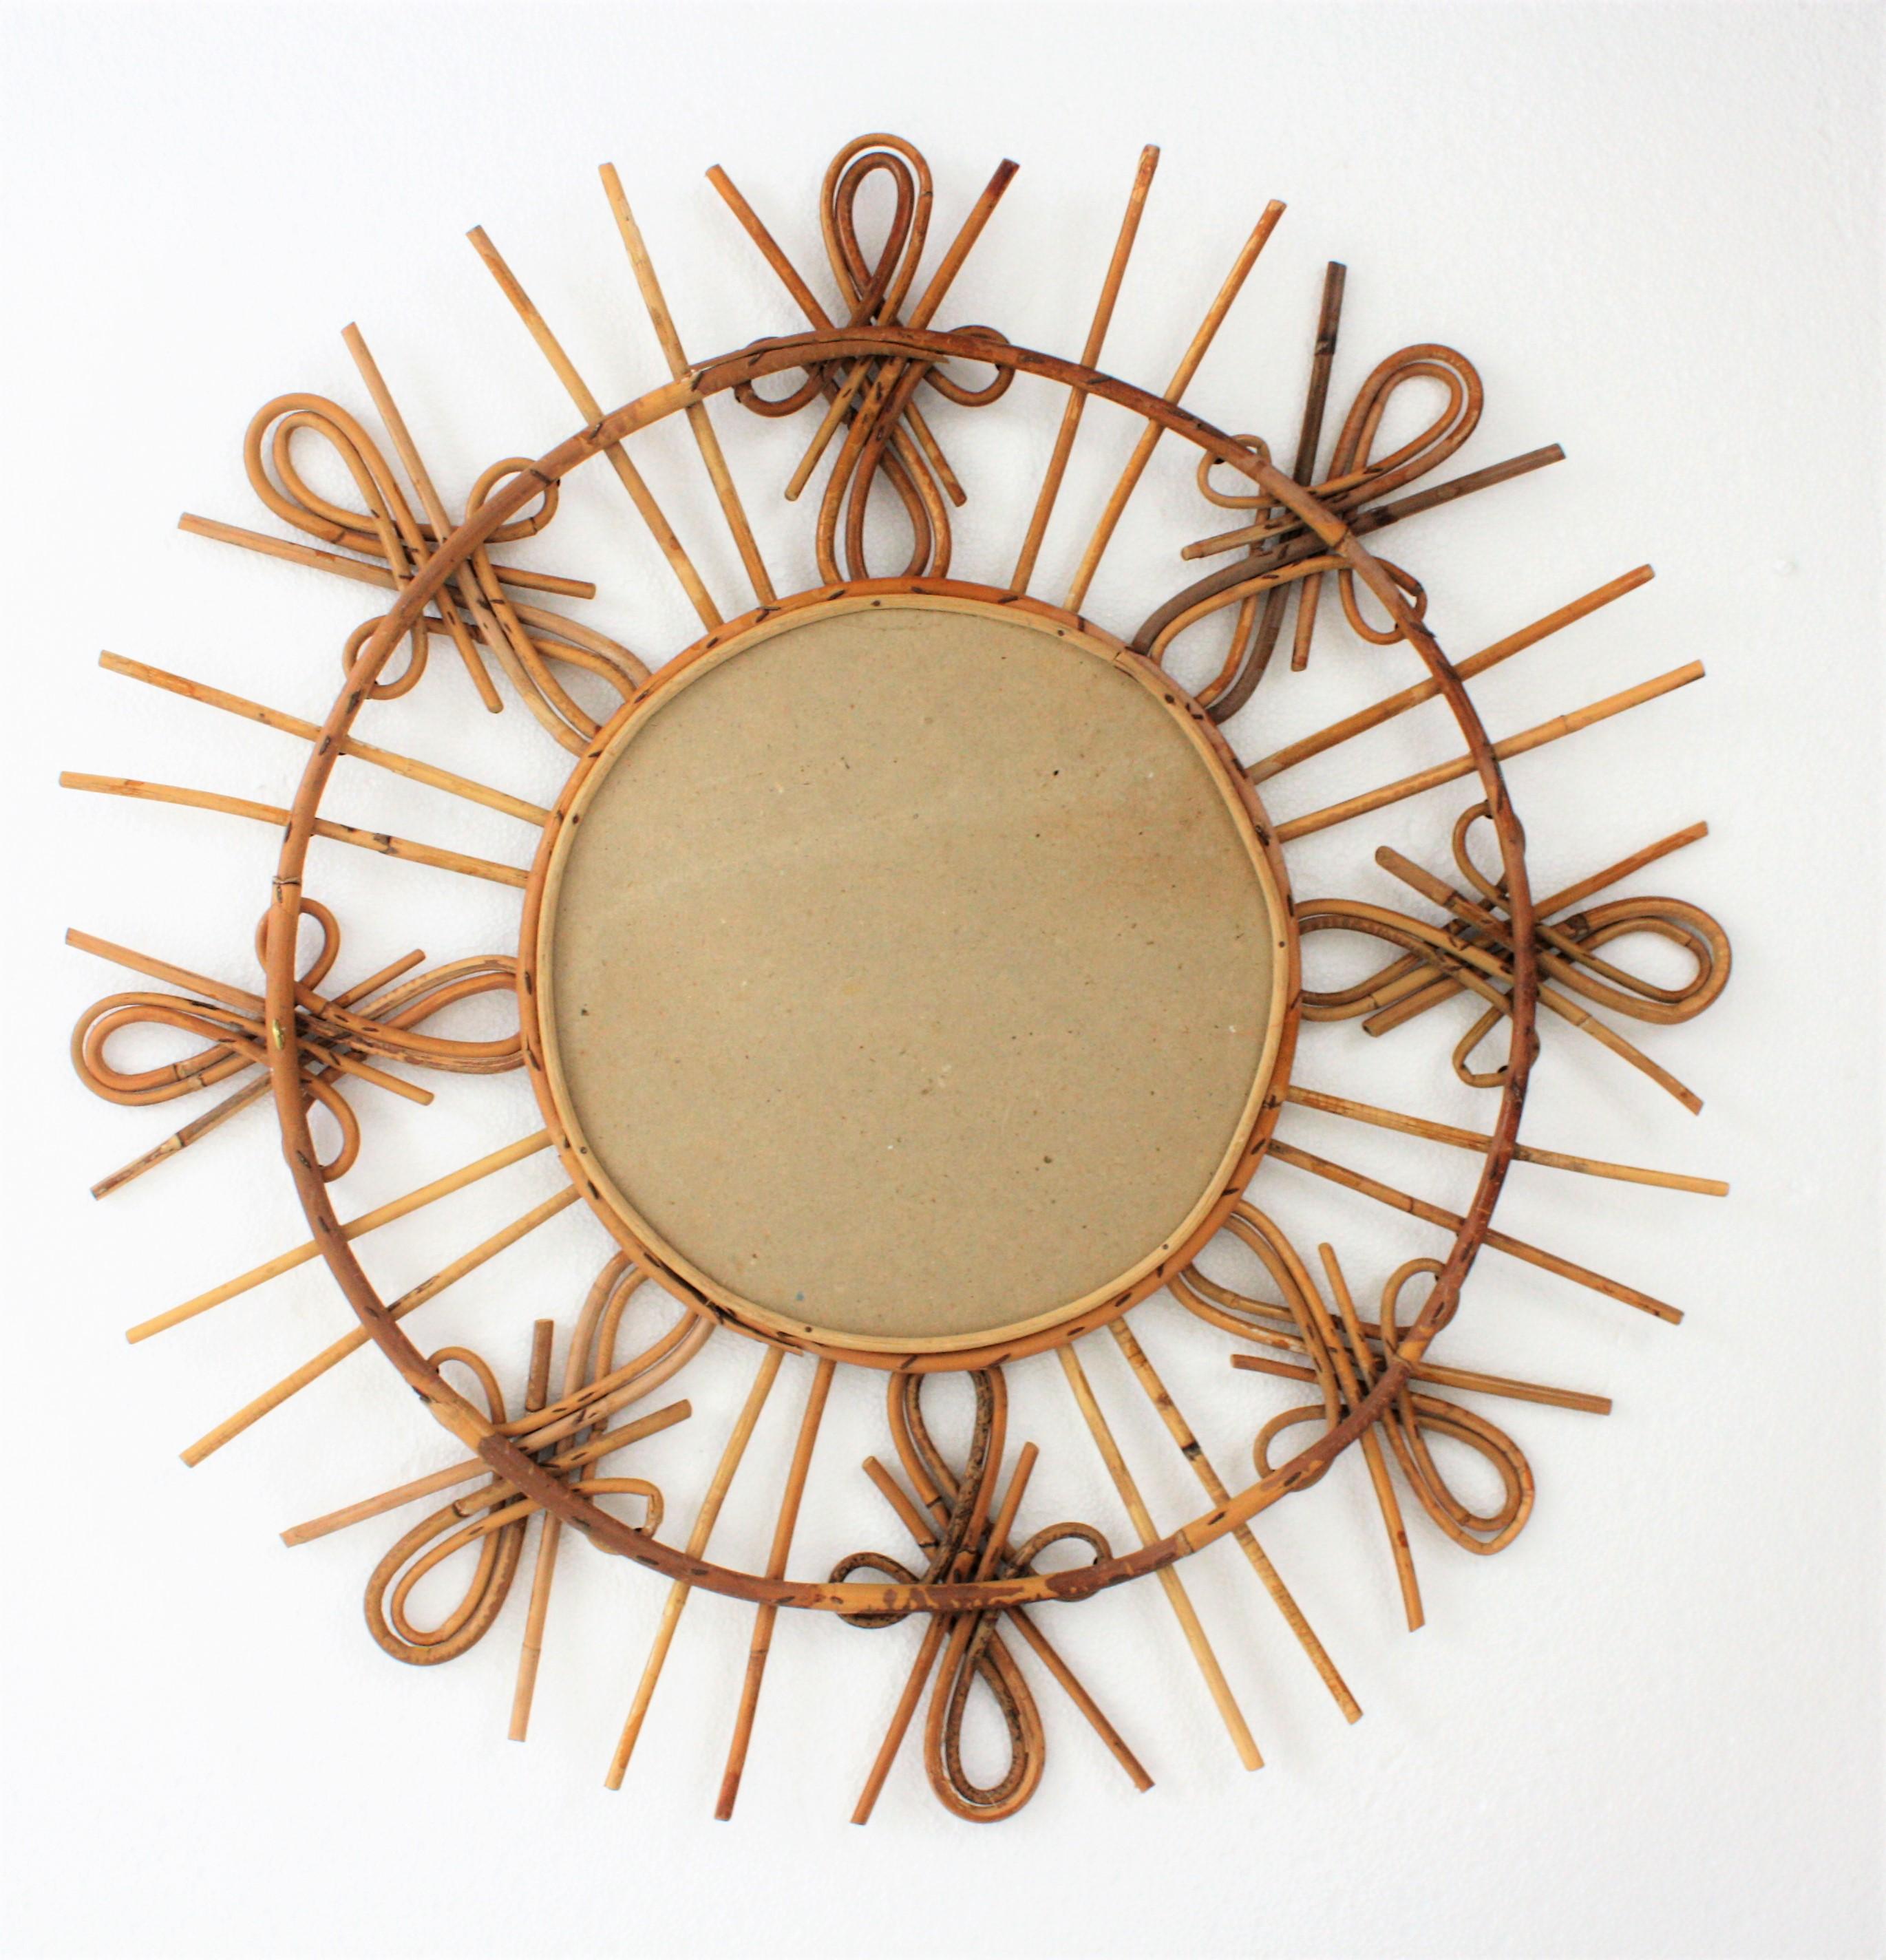 Rattan Sunburst Mirror with Chinoiserie Tiki Accents, Spain, 1950s For Sale 5